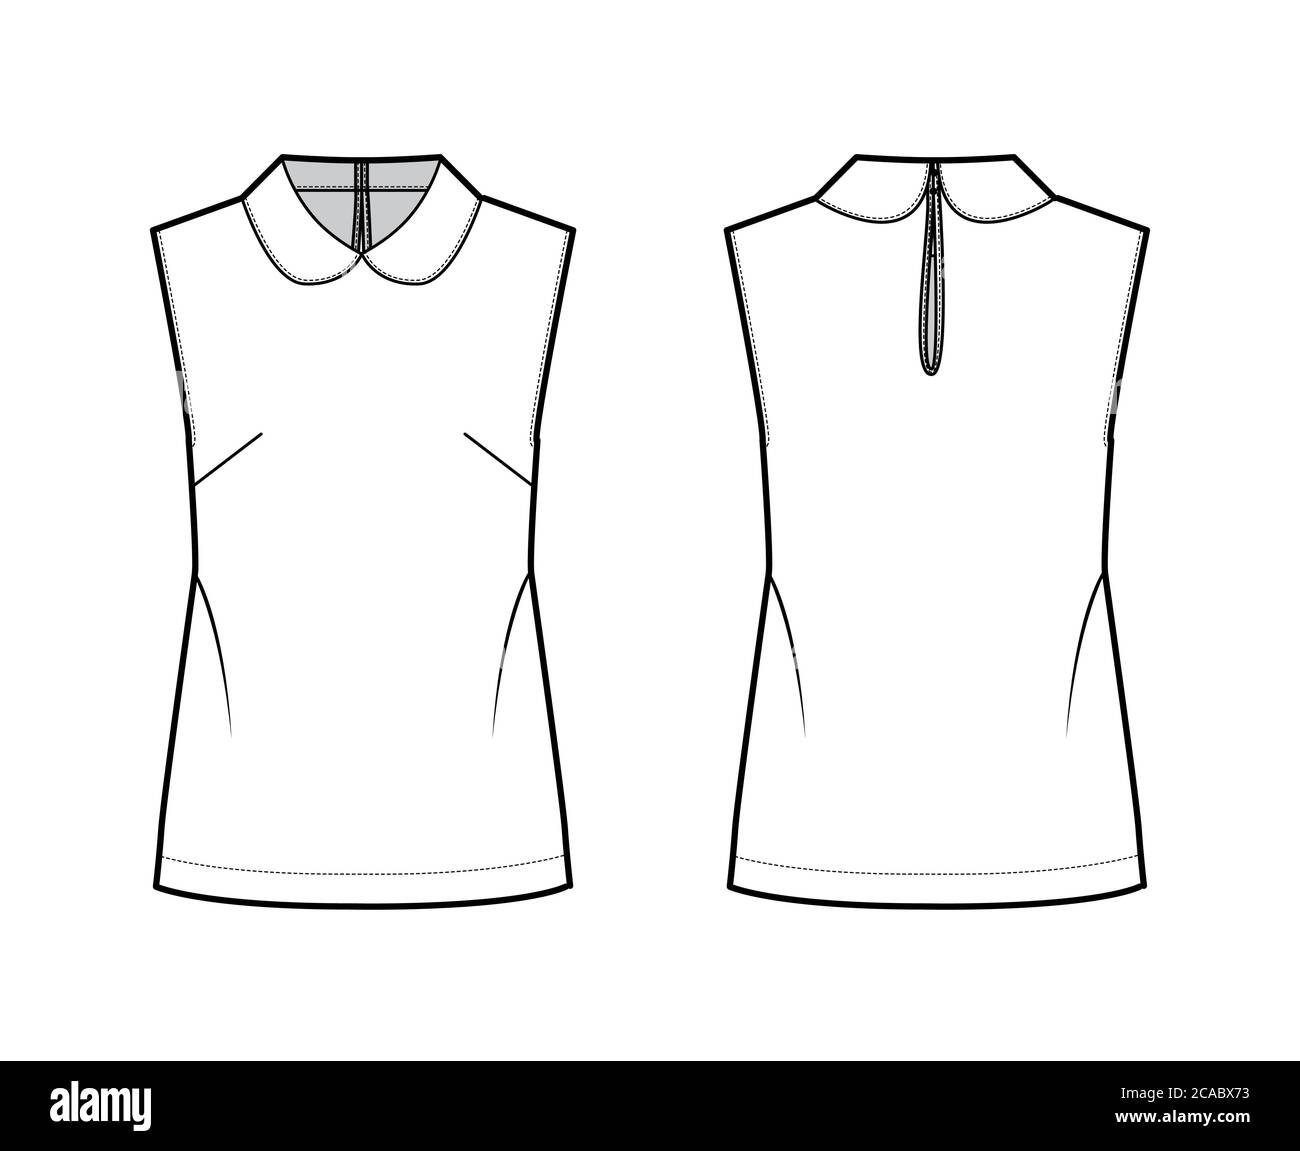 Round collar blouse technical fashion illustration with loose silhouette, sleeveless, back button-fastening keyhole. Flat shirt apparel template front back white color. Women men unisex top CAD mockup Stock Vector